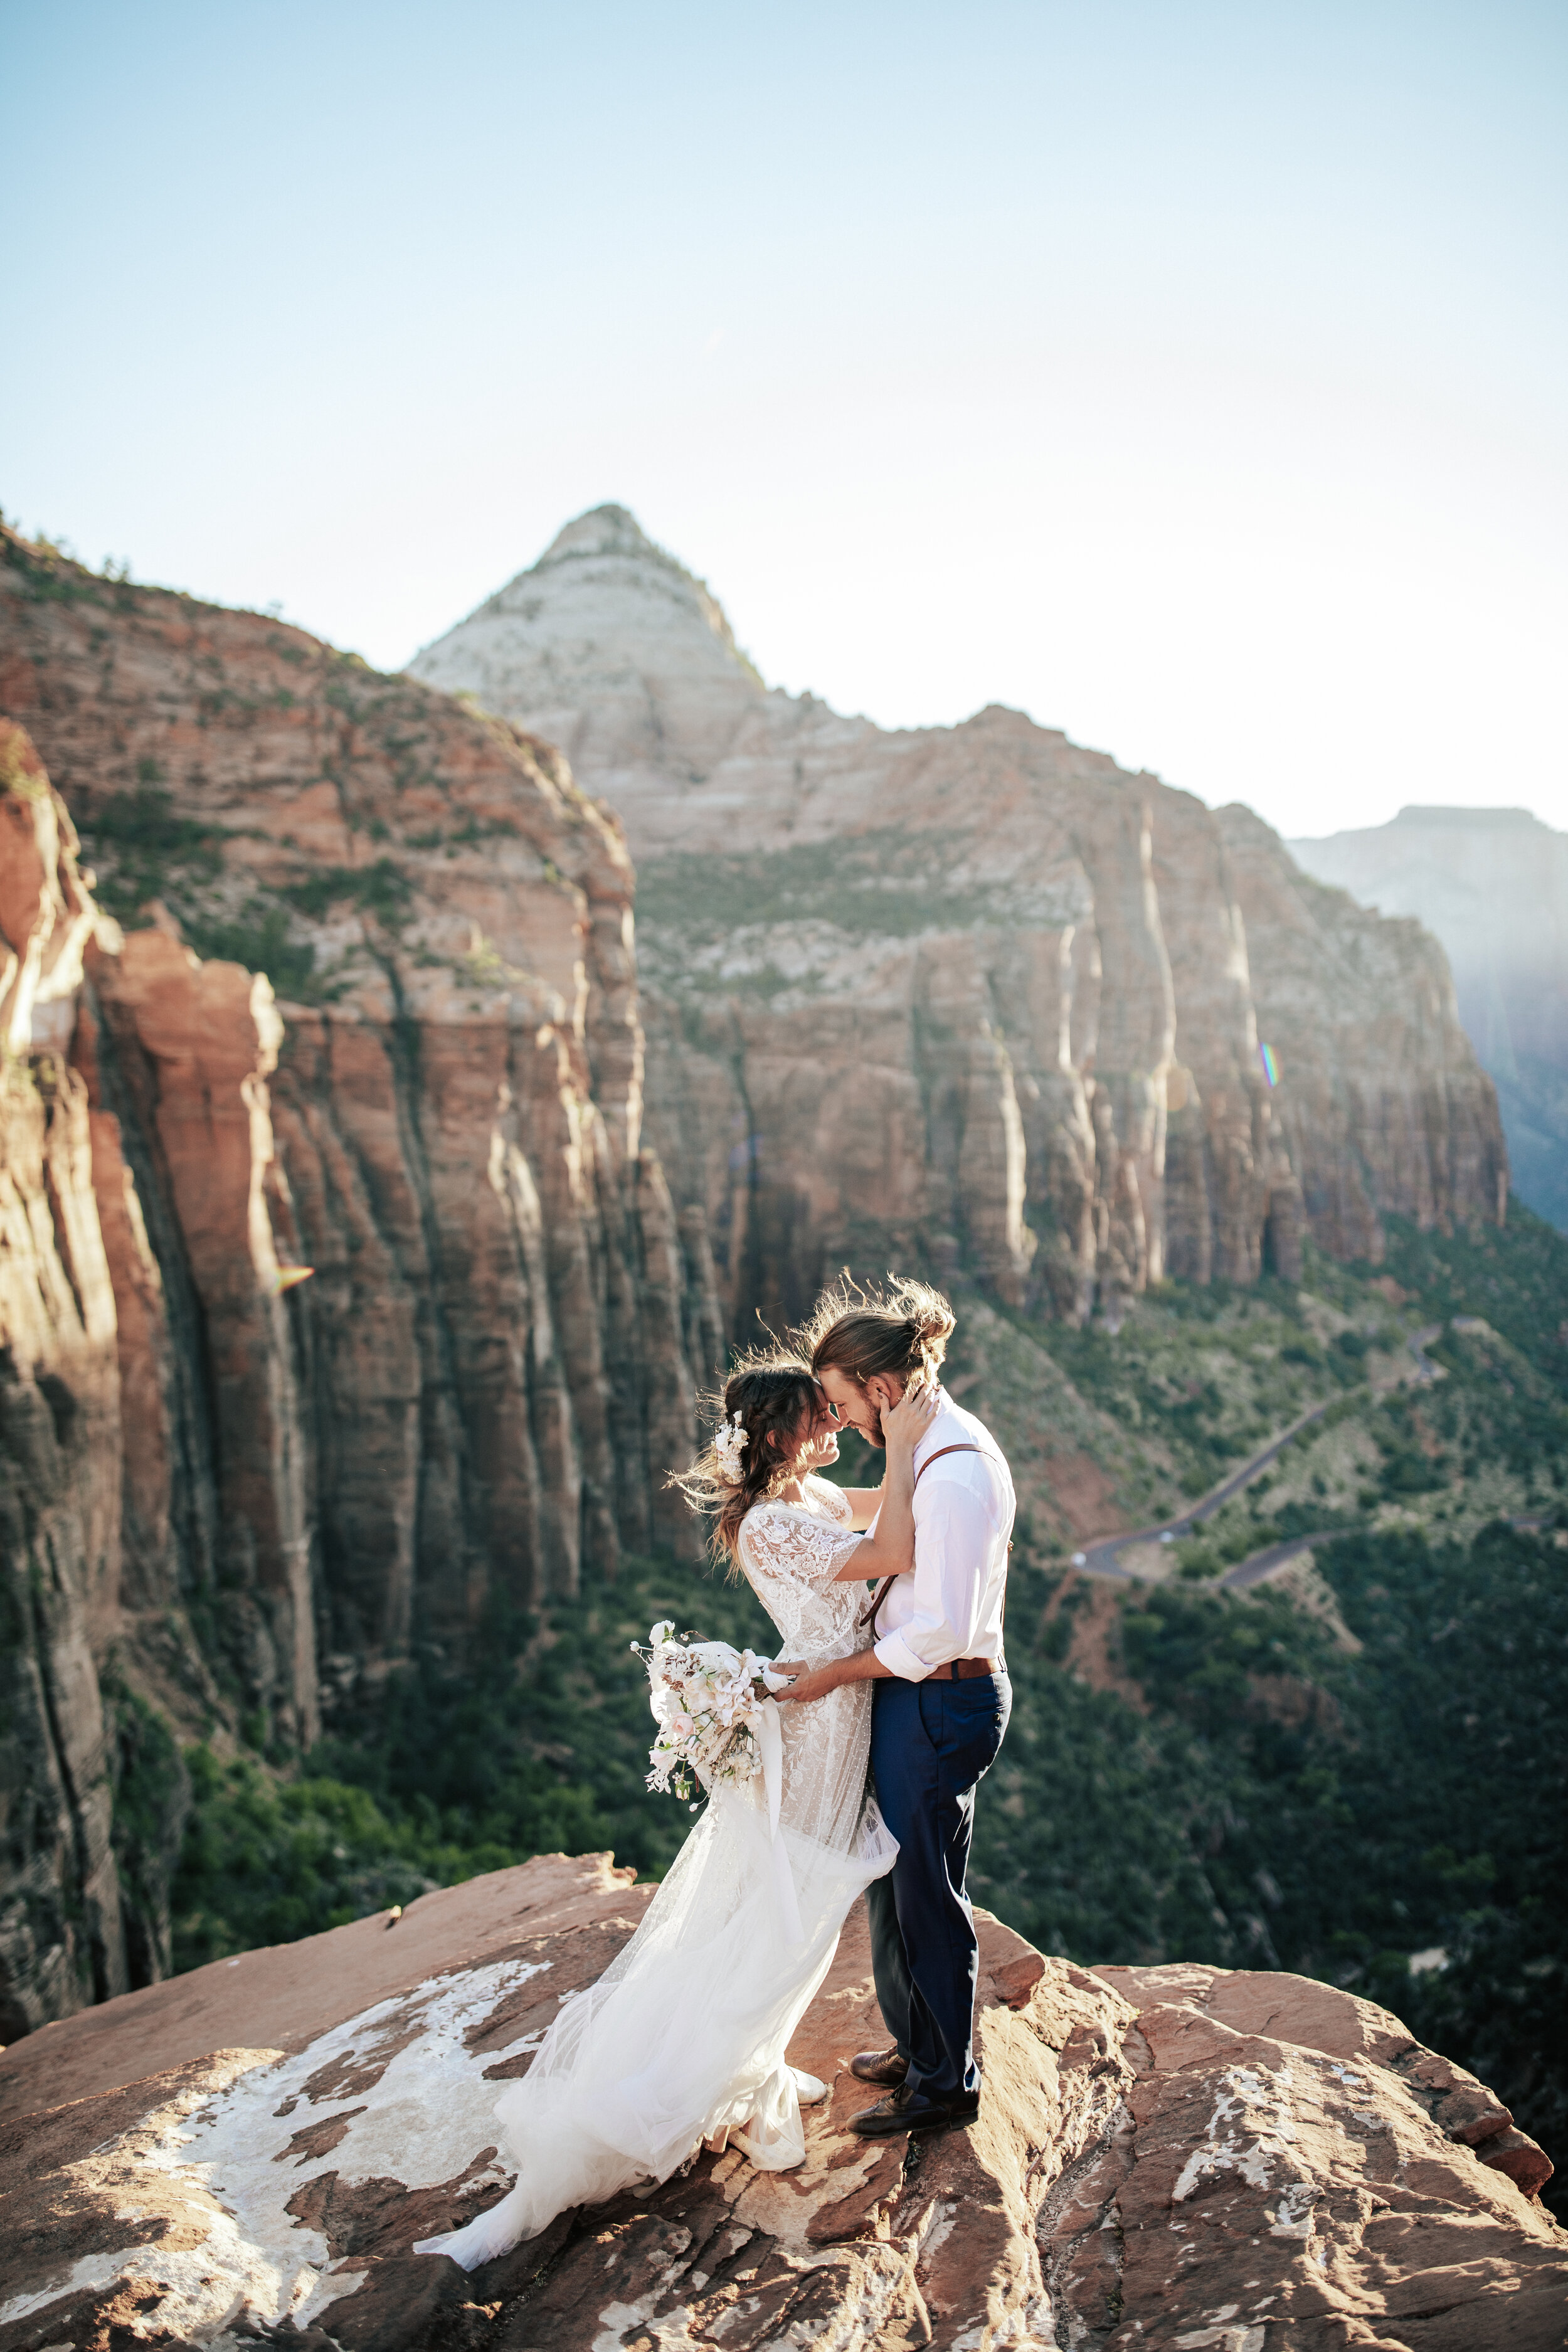  A glowing couple hold each other close in a bright and airy elopement styled photo shoot in Zion National Park by professional elopement photographer Emily Jenkins Photography.  Outdoor photo shoot inspiration ideas and goals couple goals wedding go